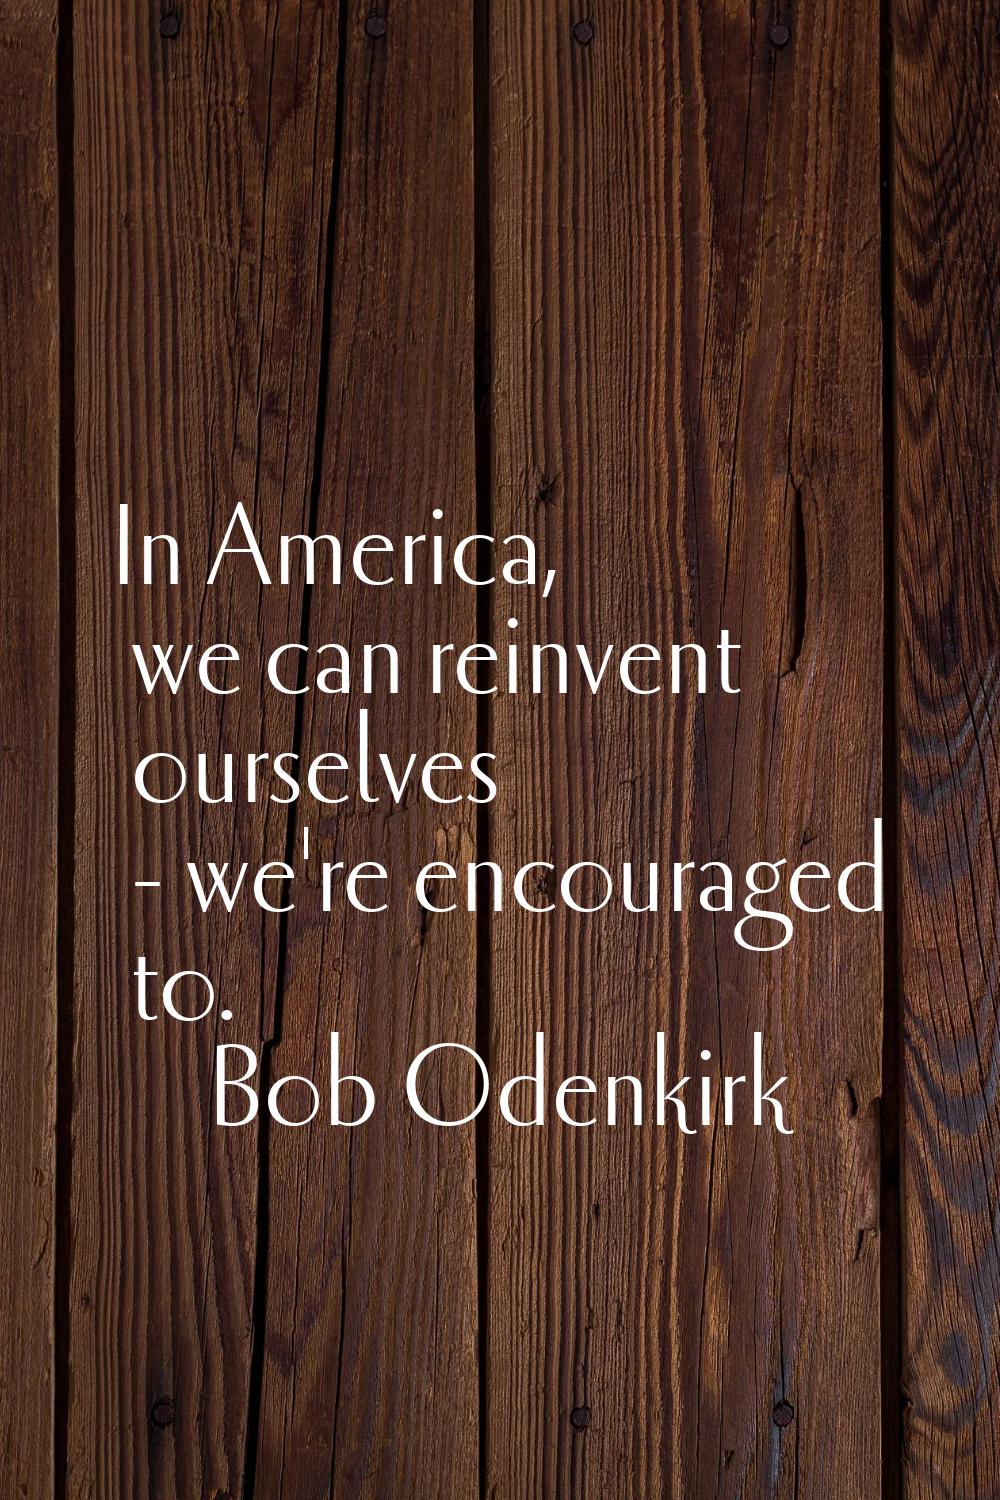 In America, we can reinvent ourselves - we're encouraged to.